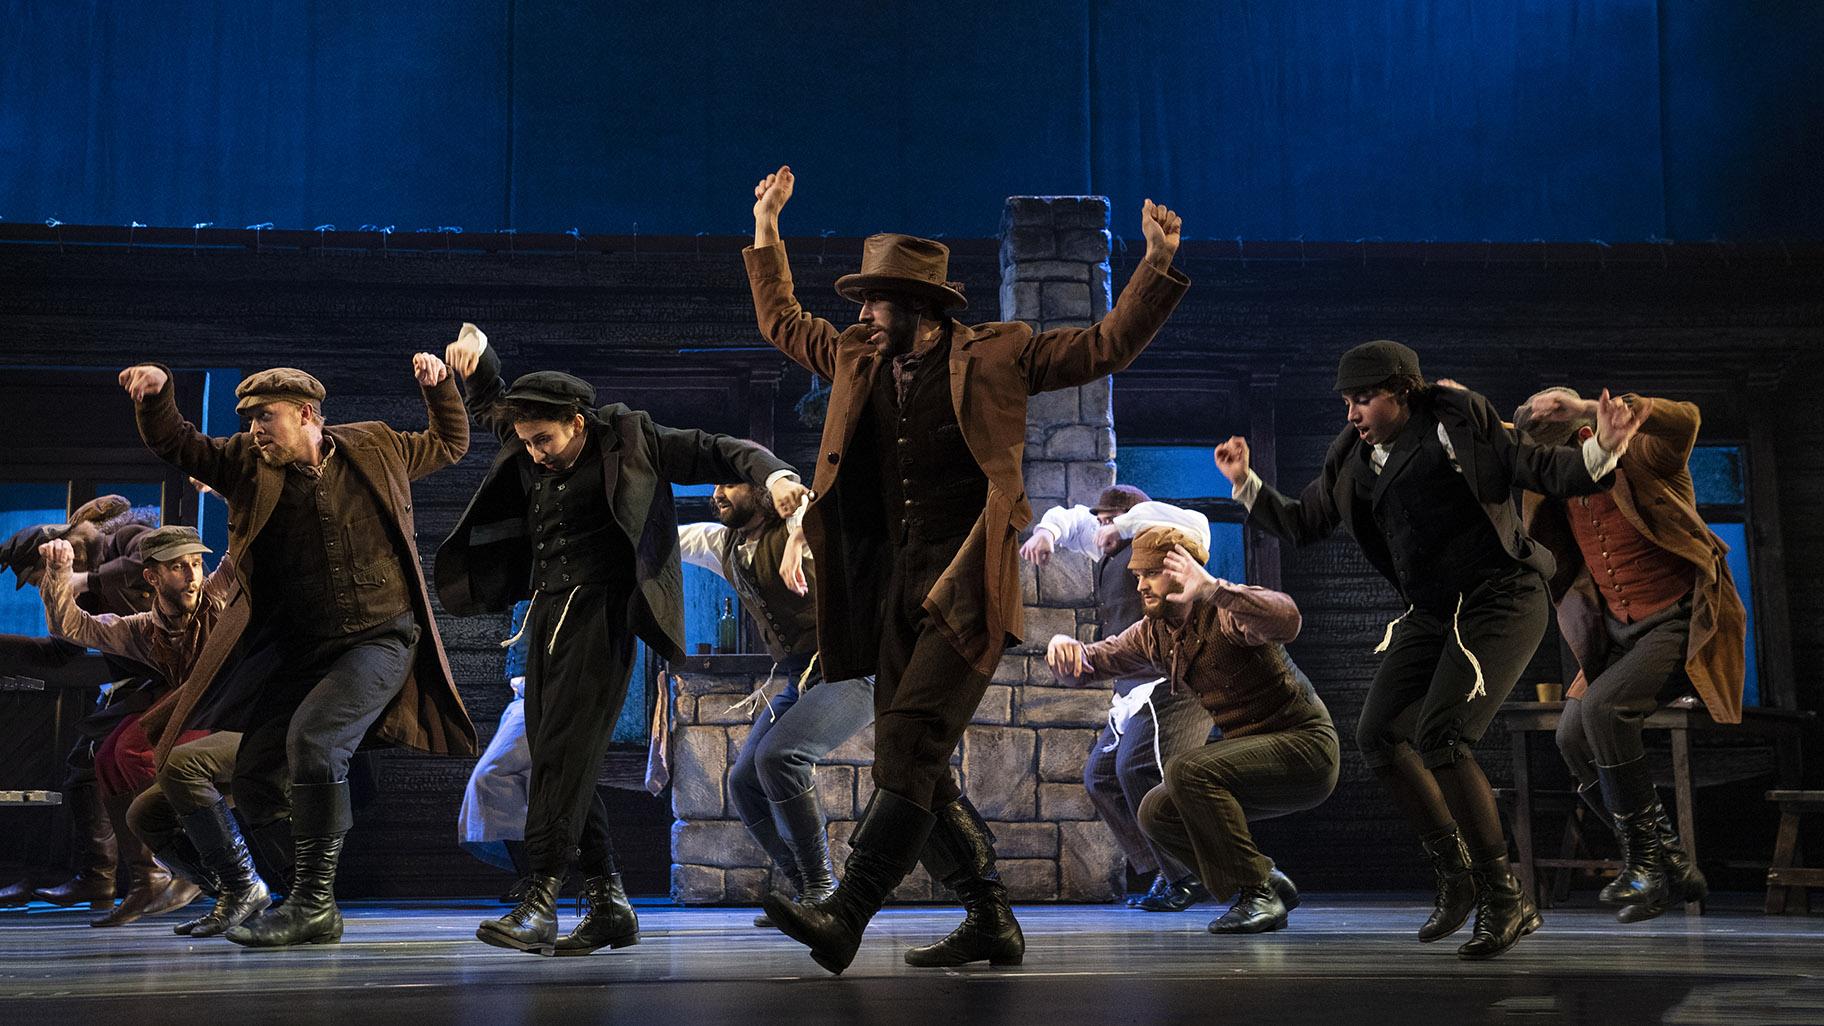 A North American touring production of “Fiddler on the Roof” is playing at the Cadillac Palace Theatre in Chicago through May 22. (Credit: Joan Marcus)